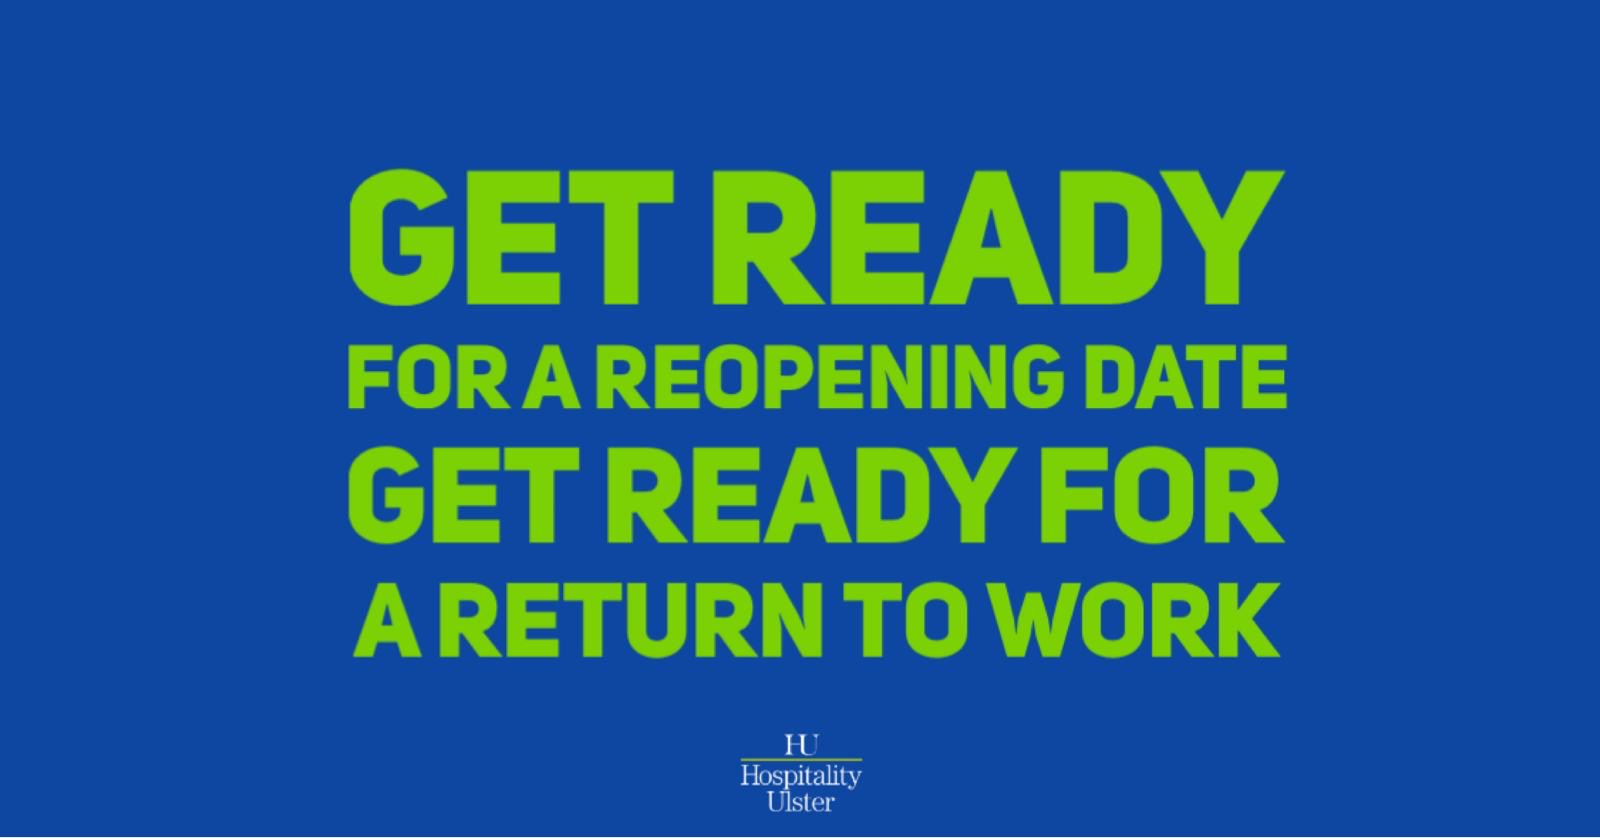 GET READY FOR A REOPENING DATE GET READY FOR A RETURN TO WORK